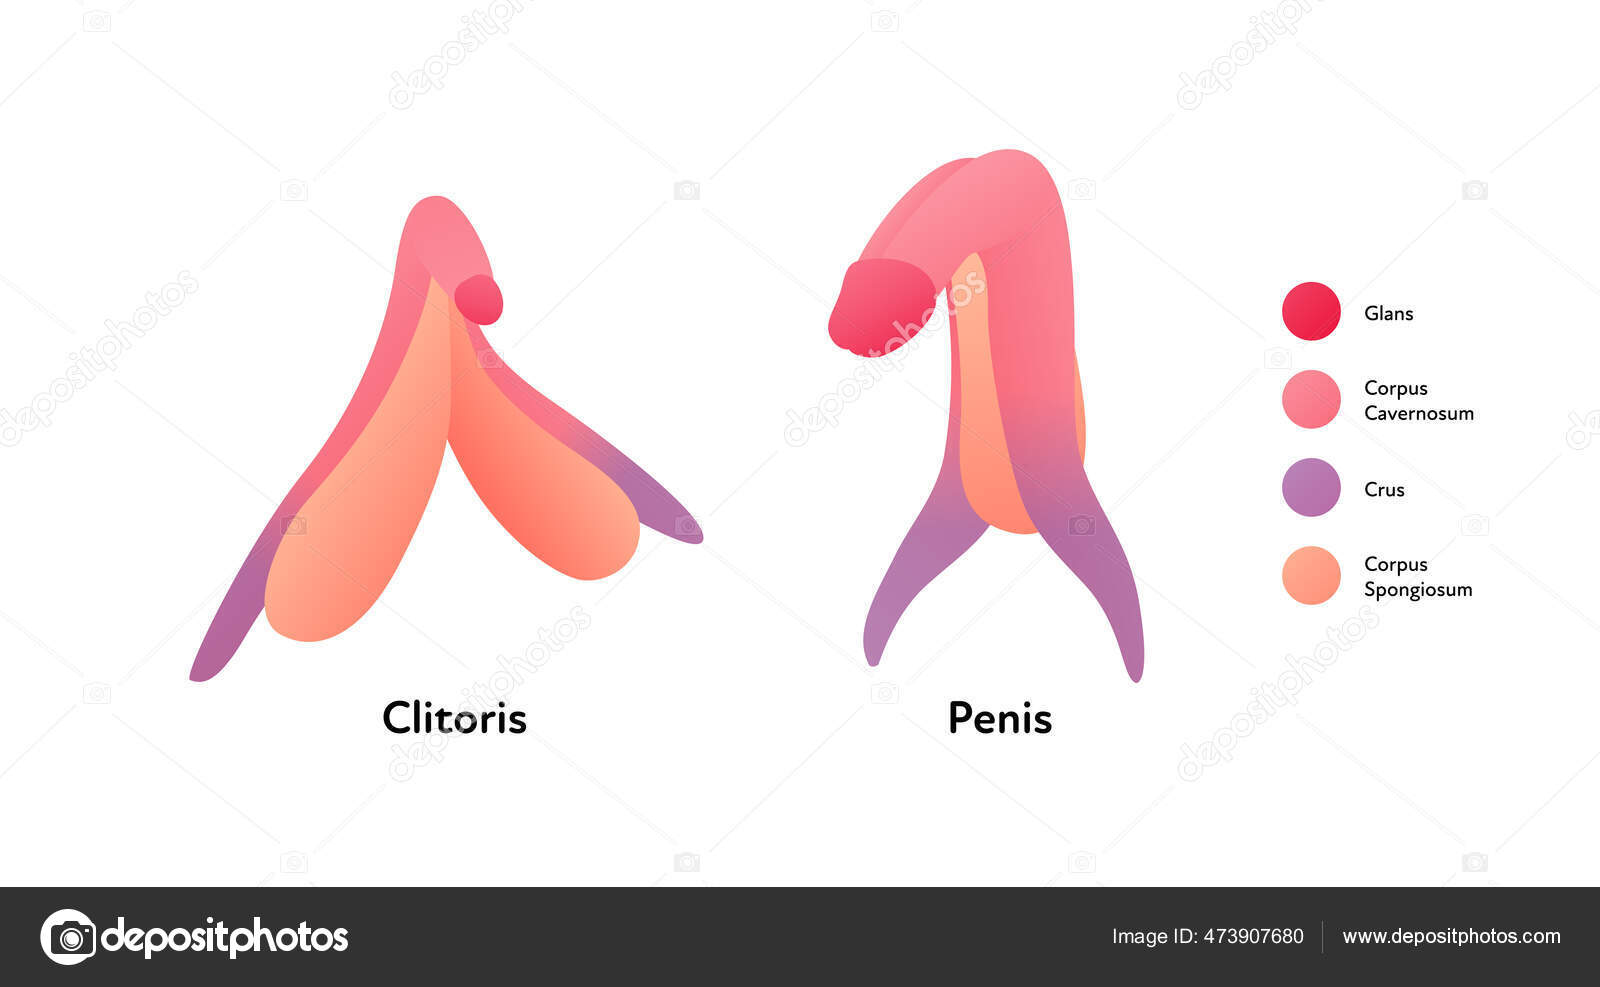 Reproductive System Infographic Poster Vector Flat Medical Illustration